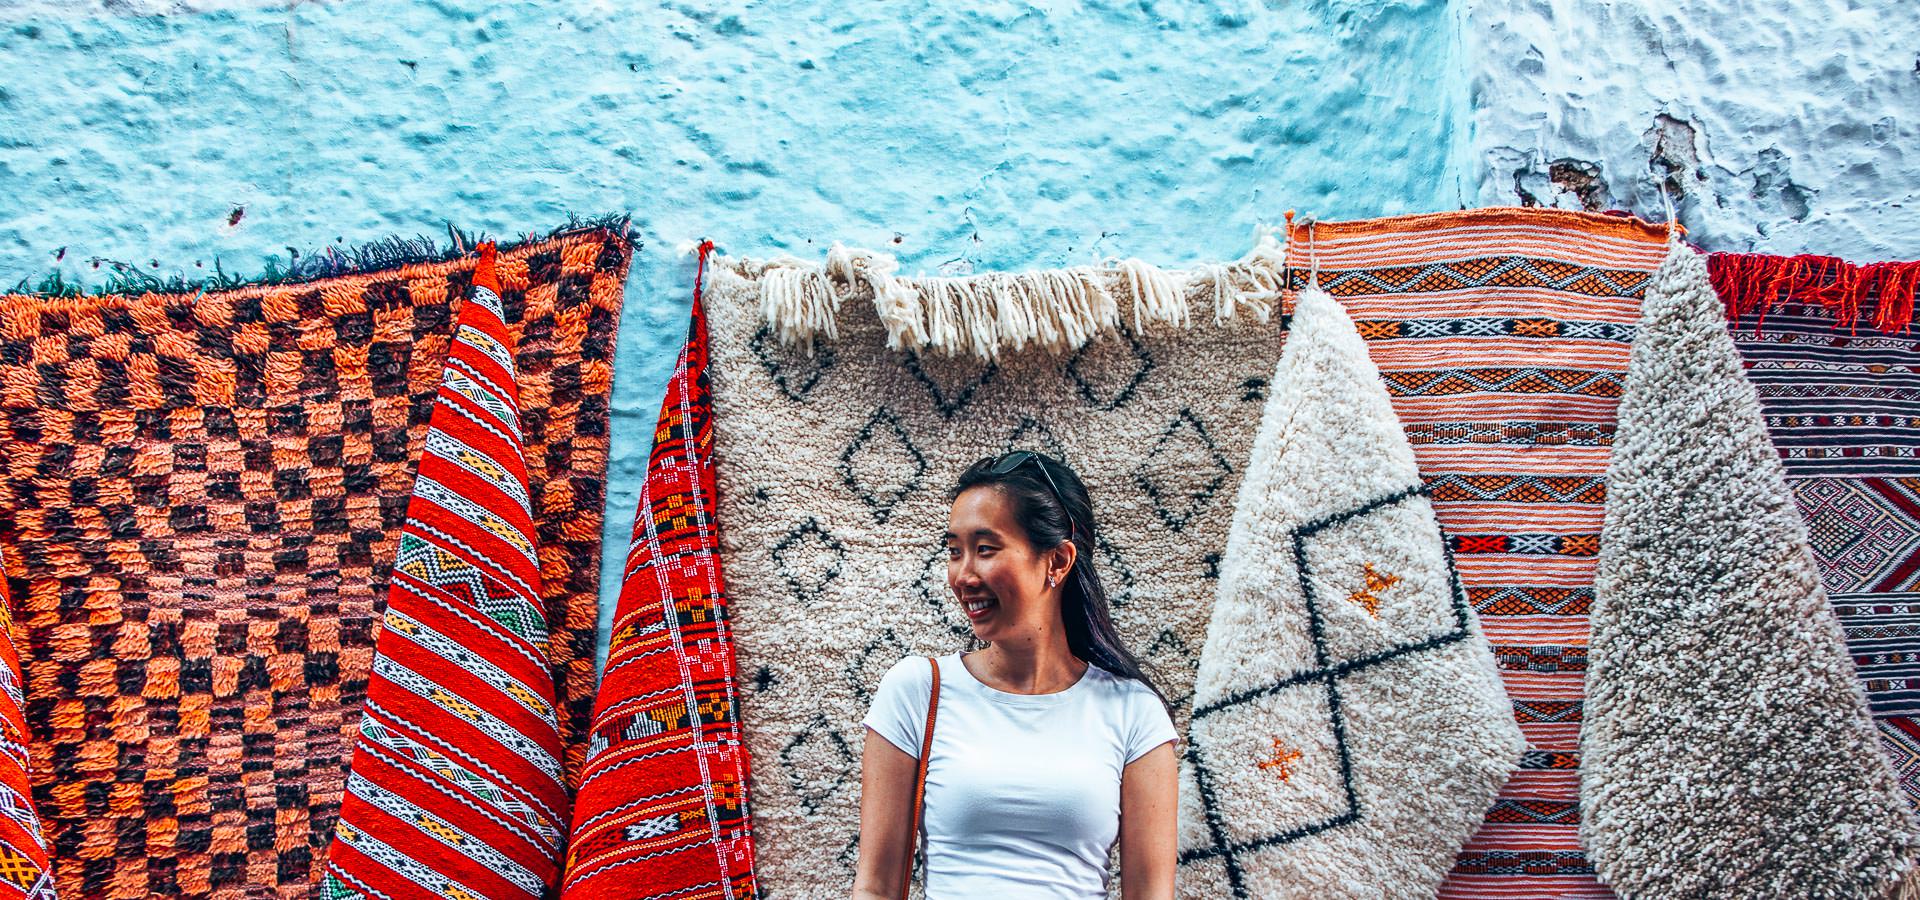 Morocco Travel Photography: 35 Photos To Inspire You To Visit | 24 hours in vilnius 7